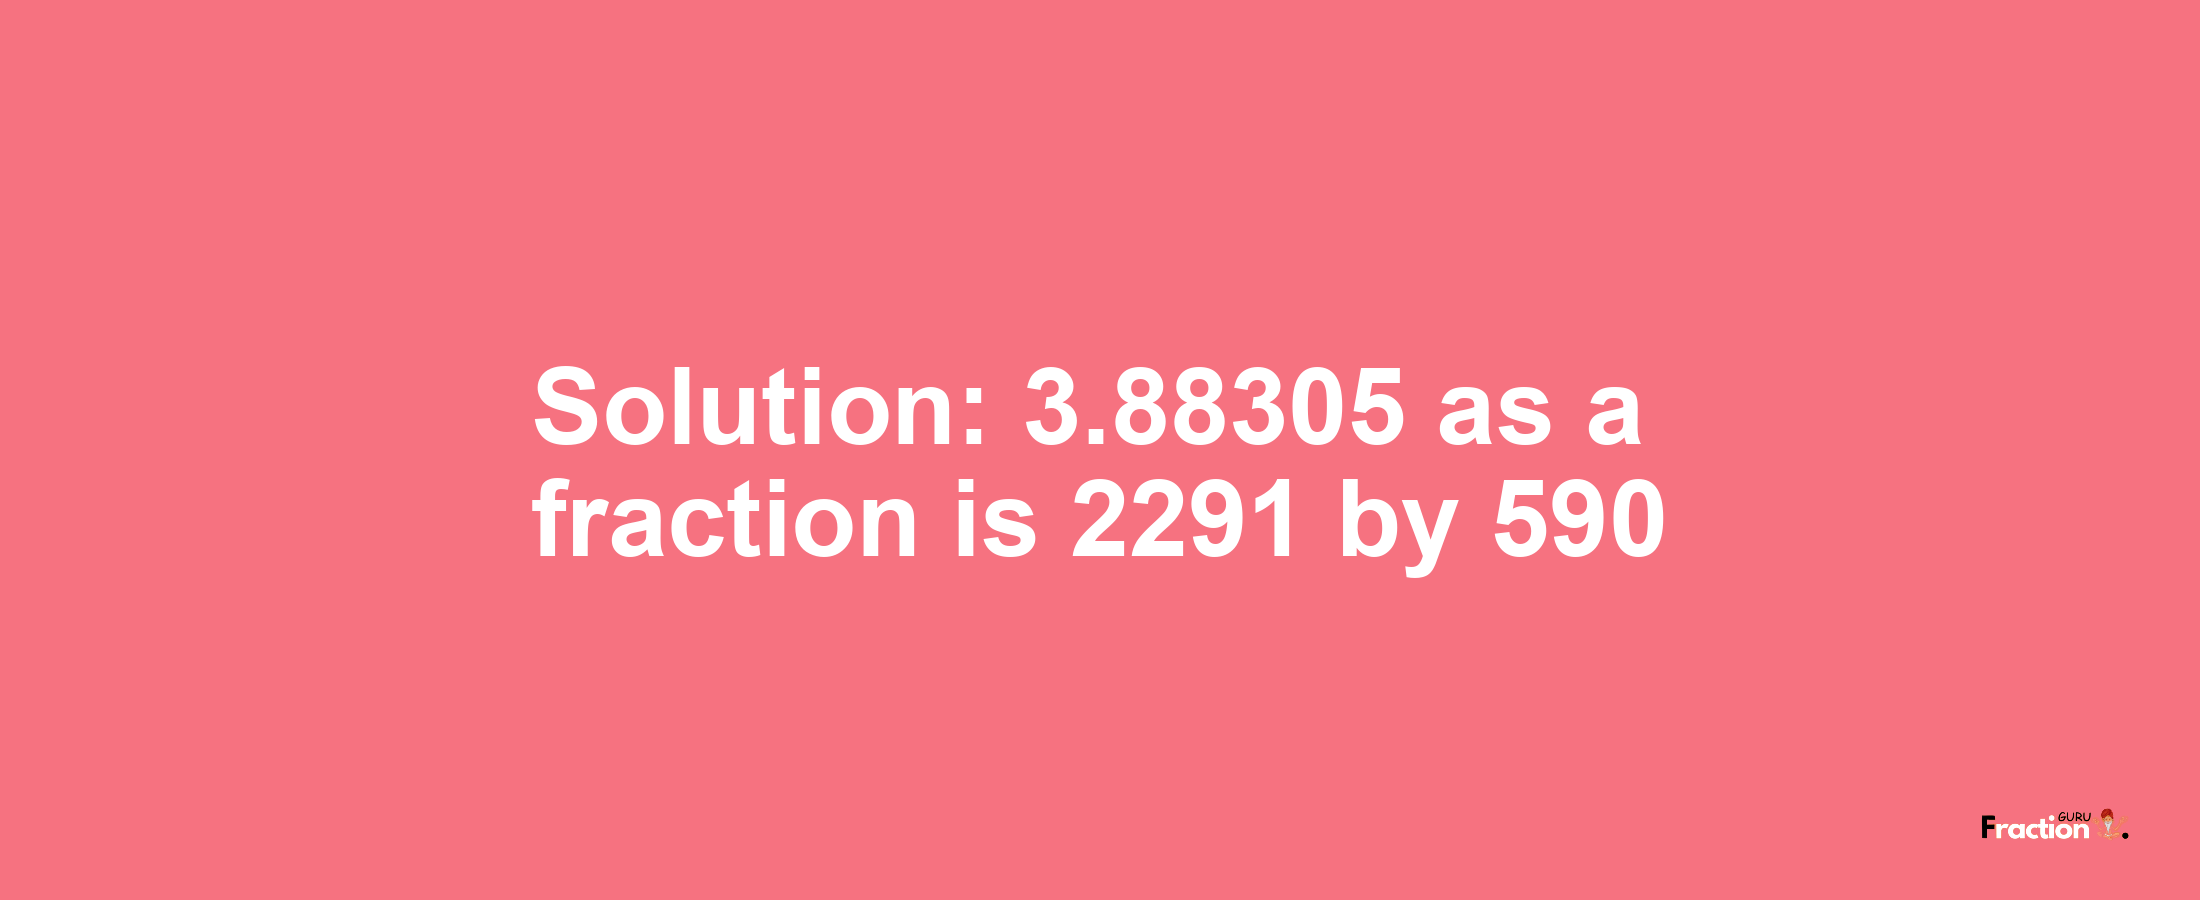 Solution:3.88305 as a fraction is 2291/590